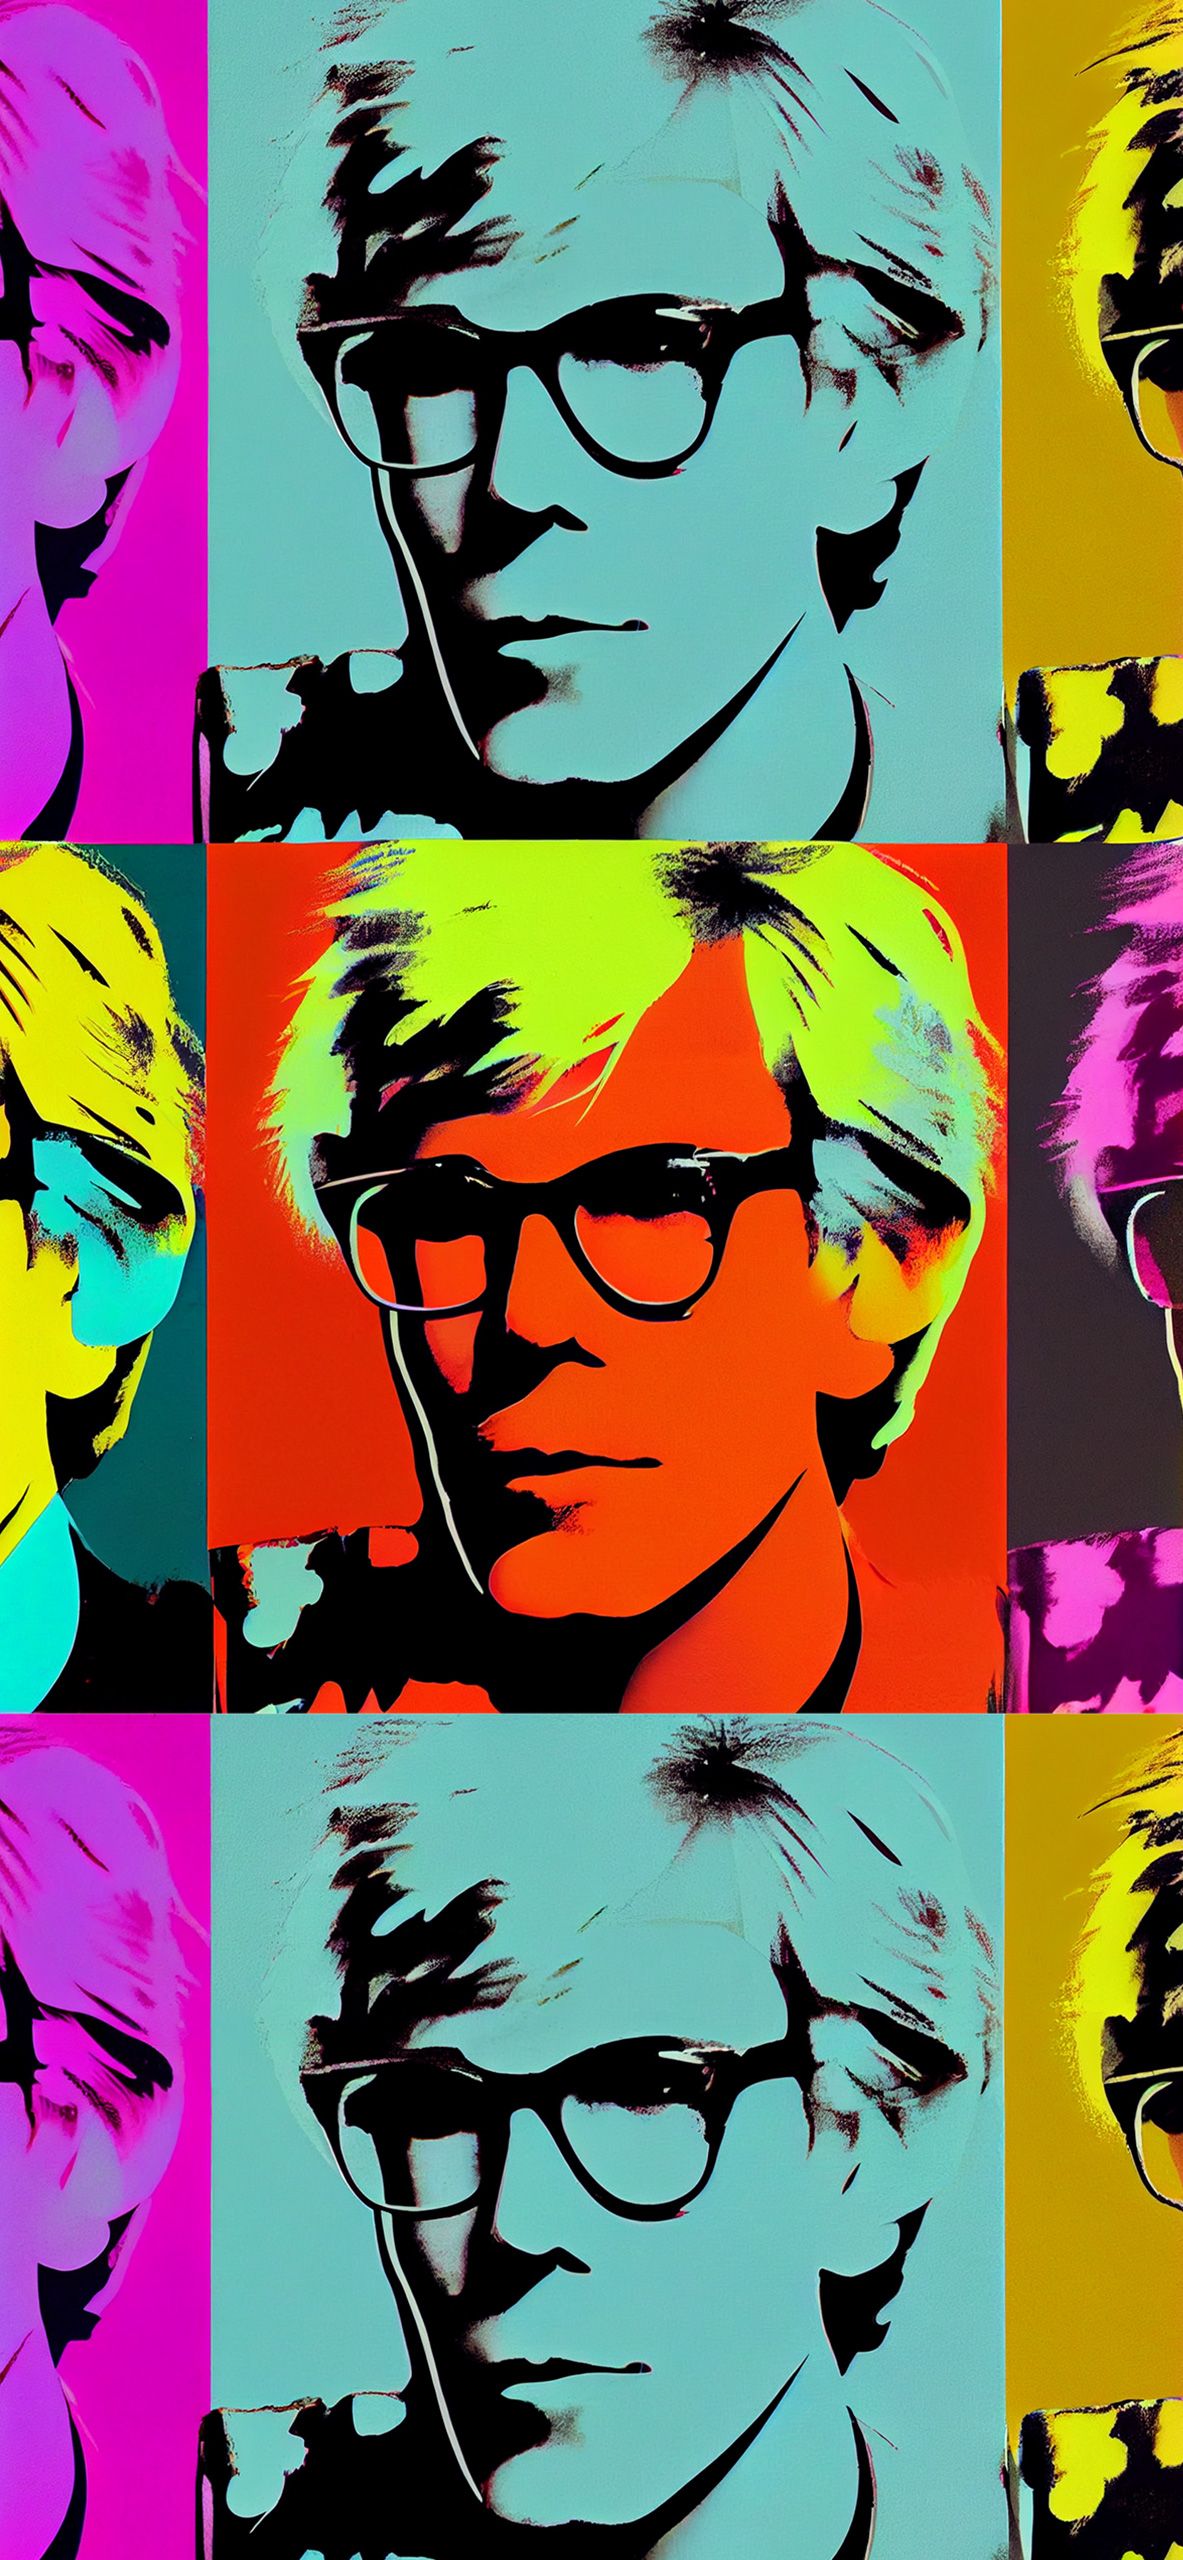 Andy Warhol, the famous pop art painter, is depicted in this artistic image. - Design, art